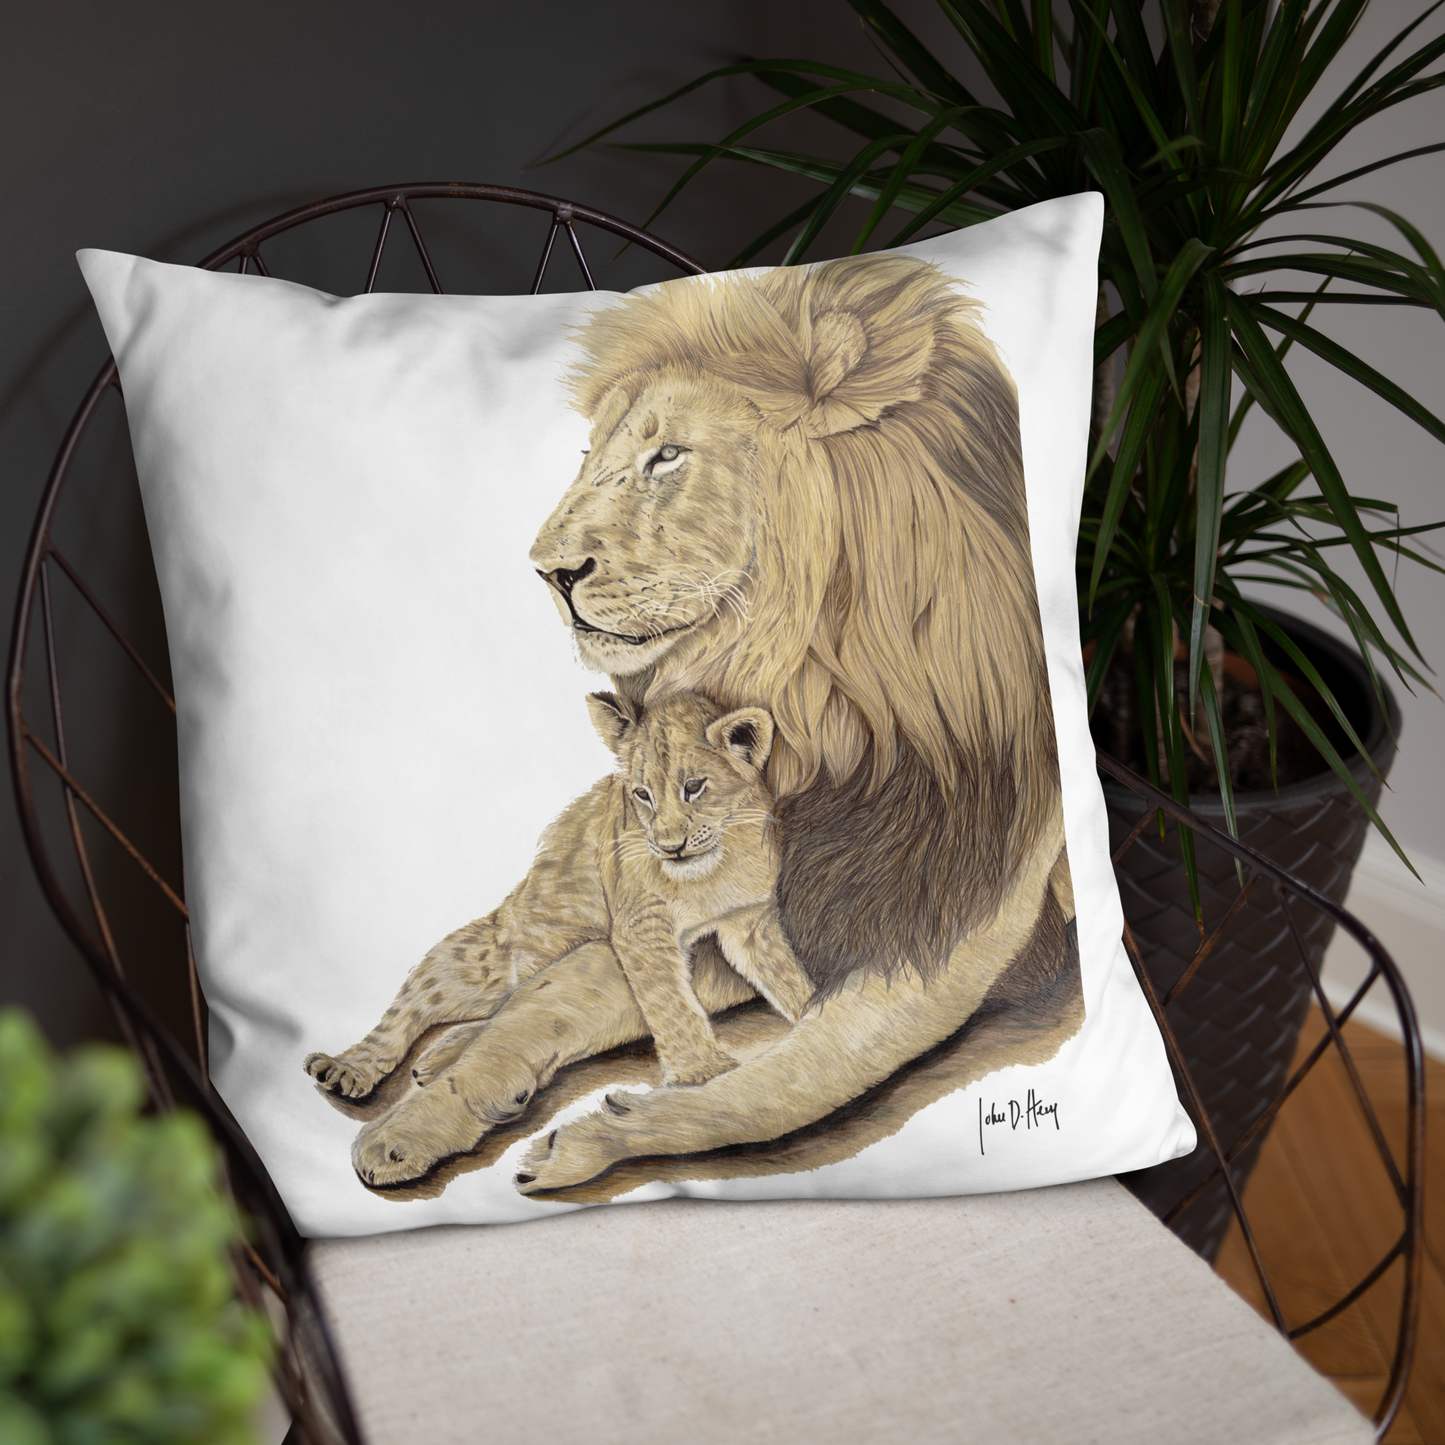 King of the Jungle - Basic Pillow